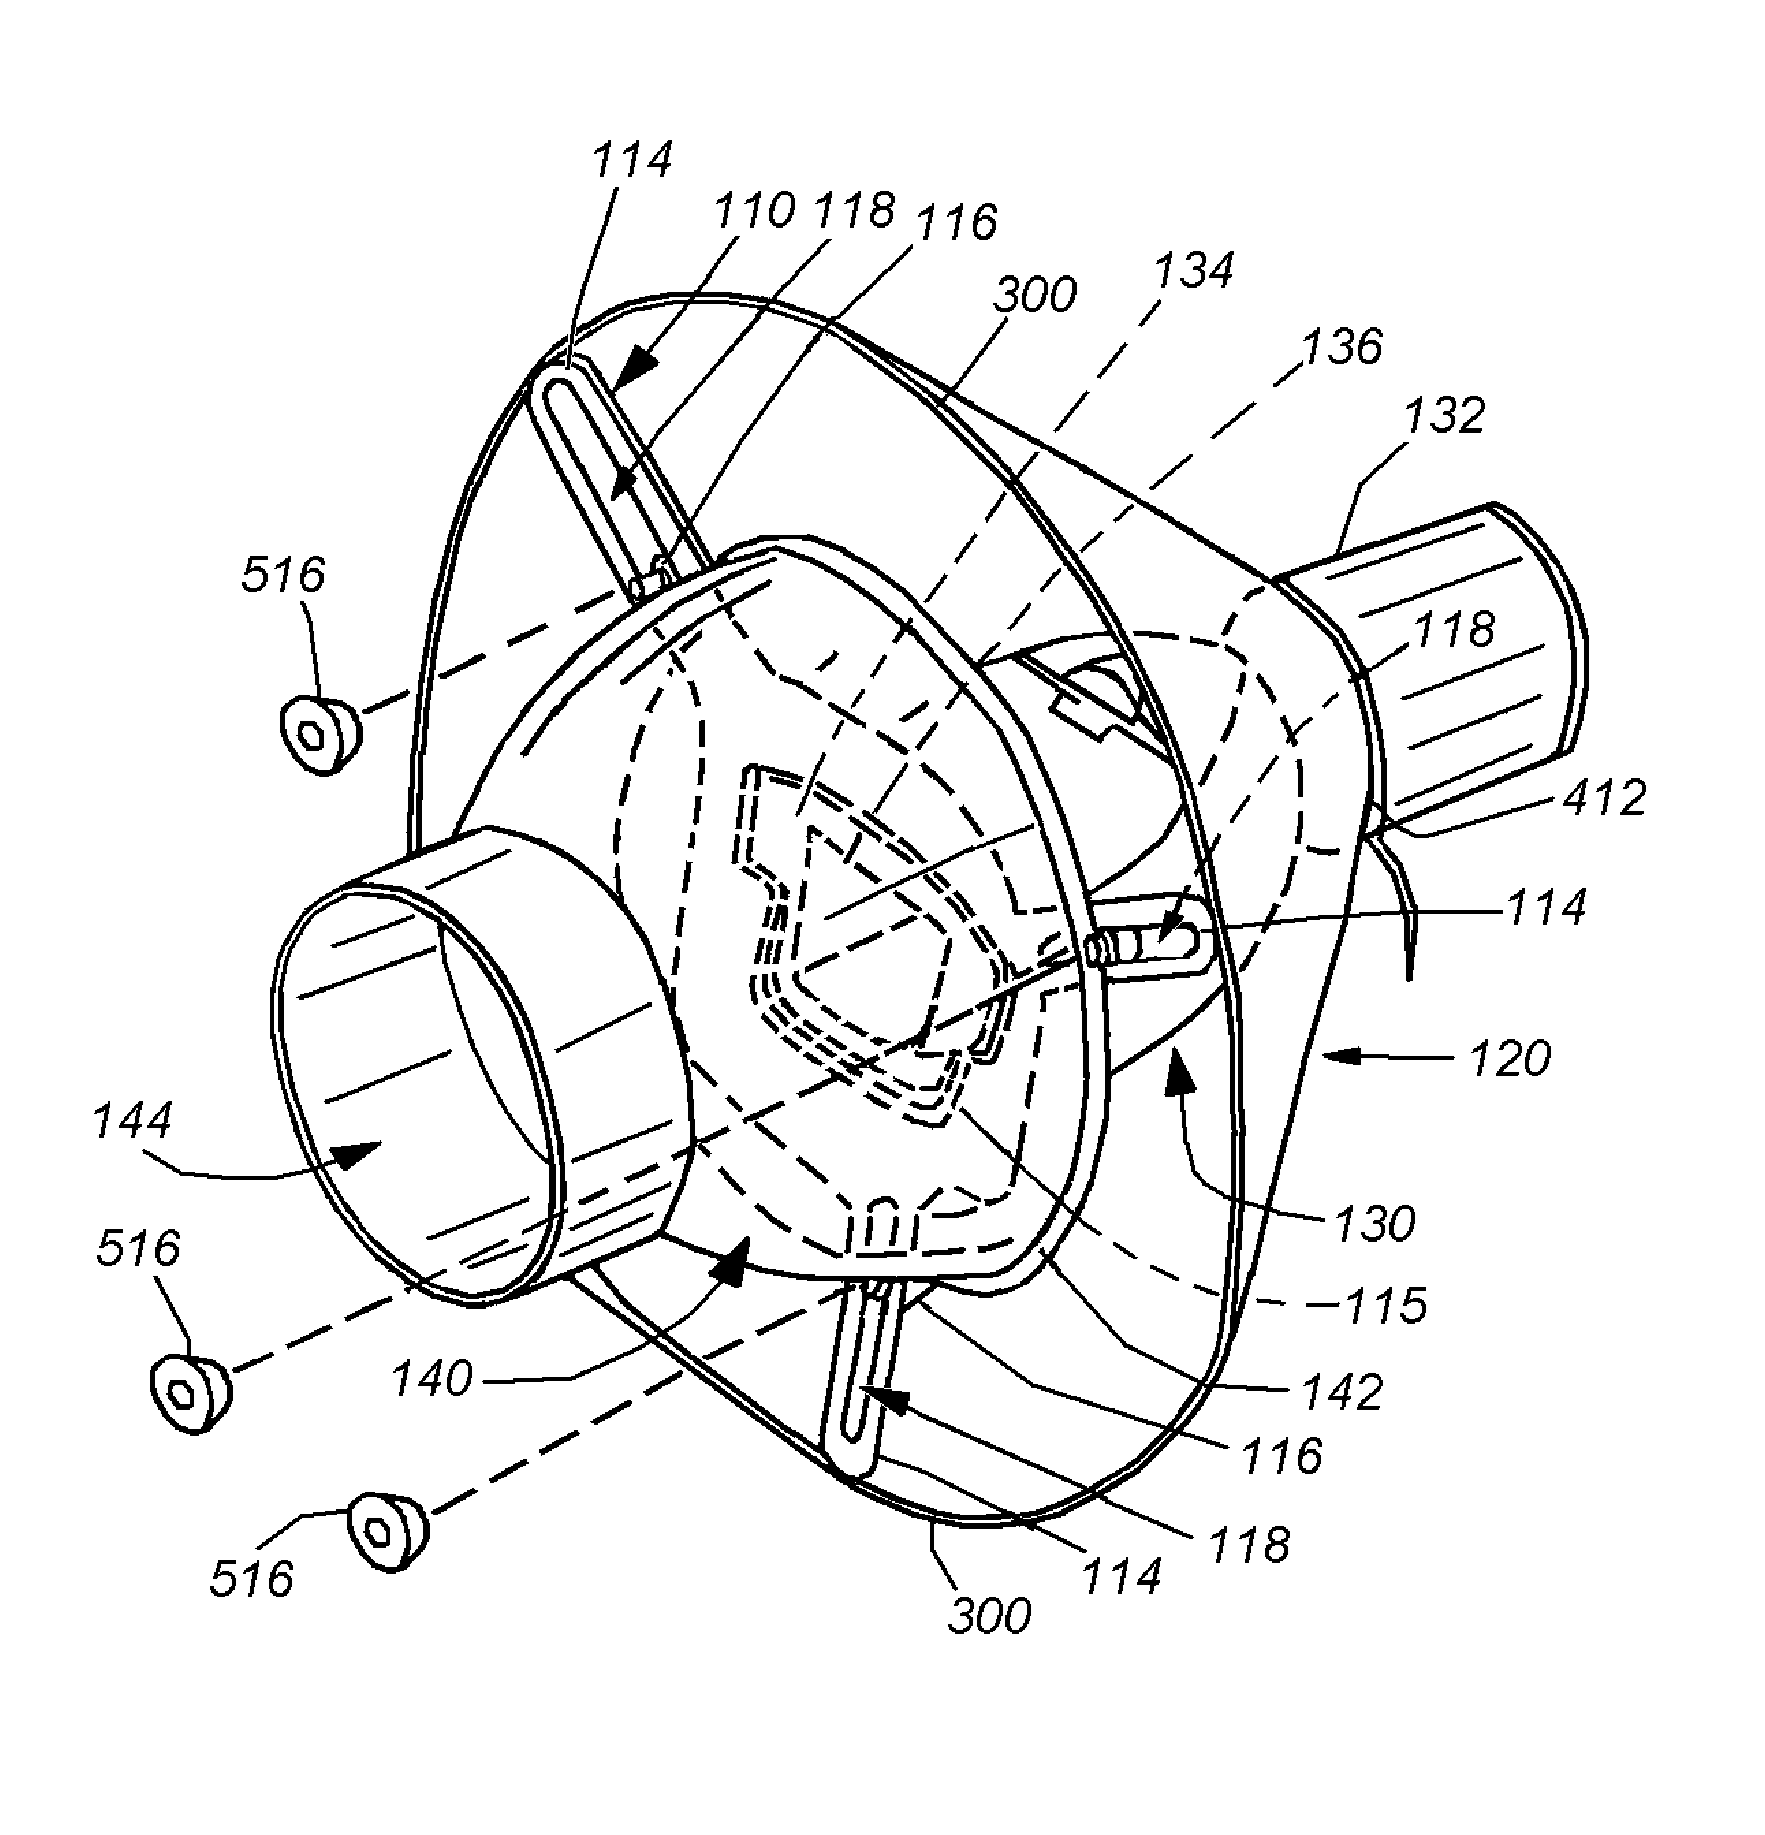 Universal adapter for light-modifying devices